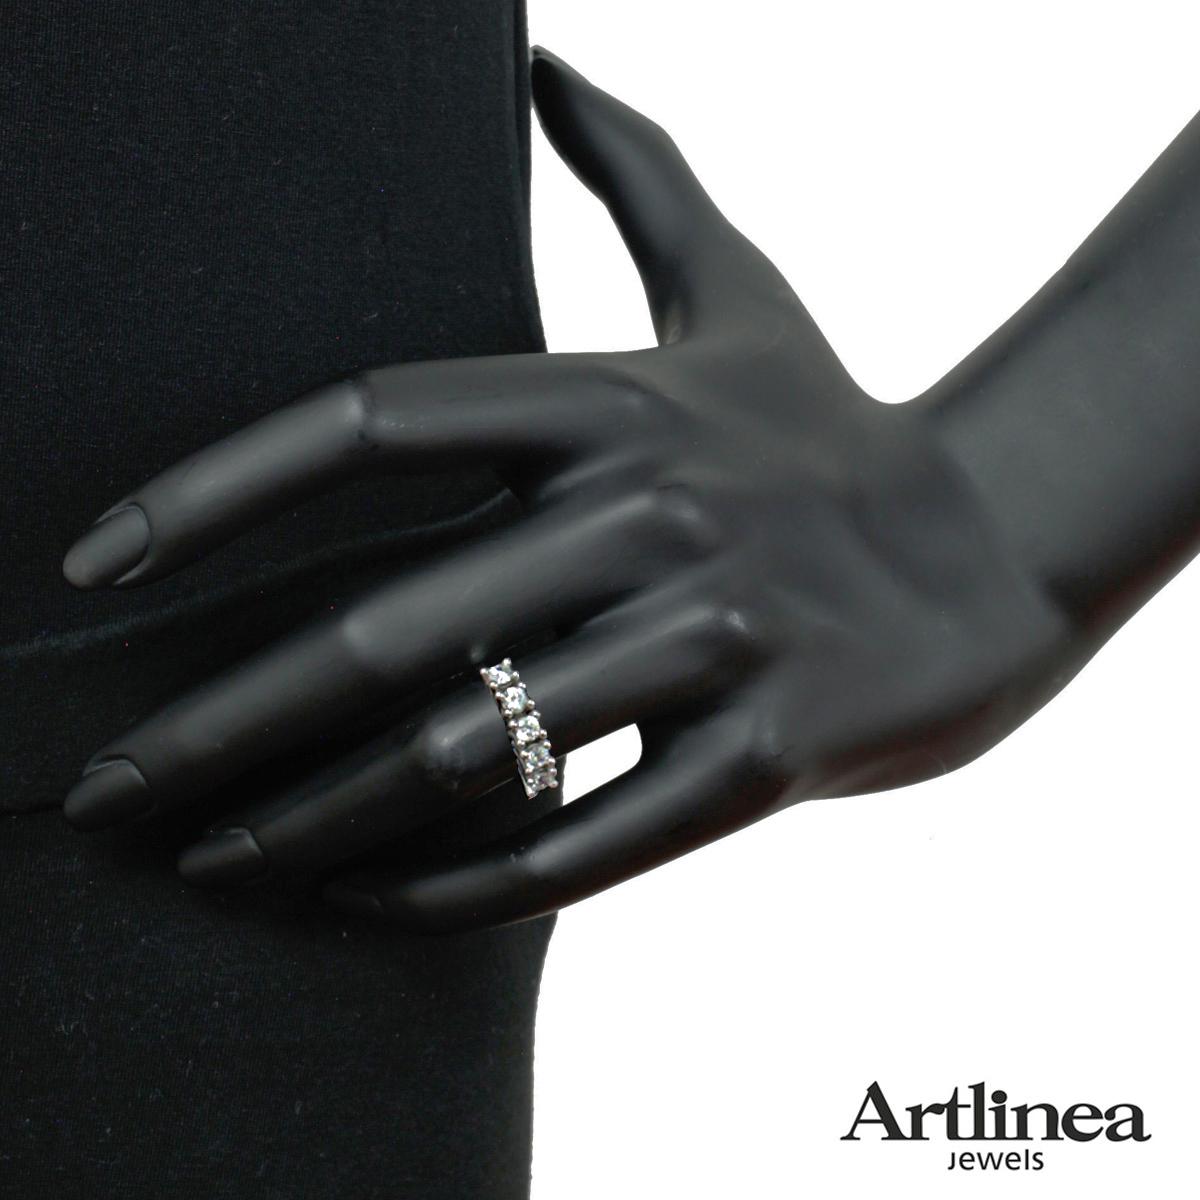 Riviera 4 claws ring with diamonds